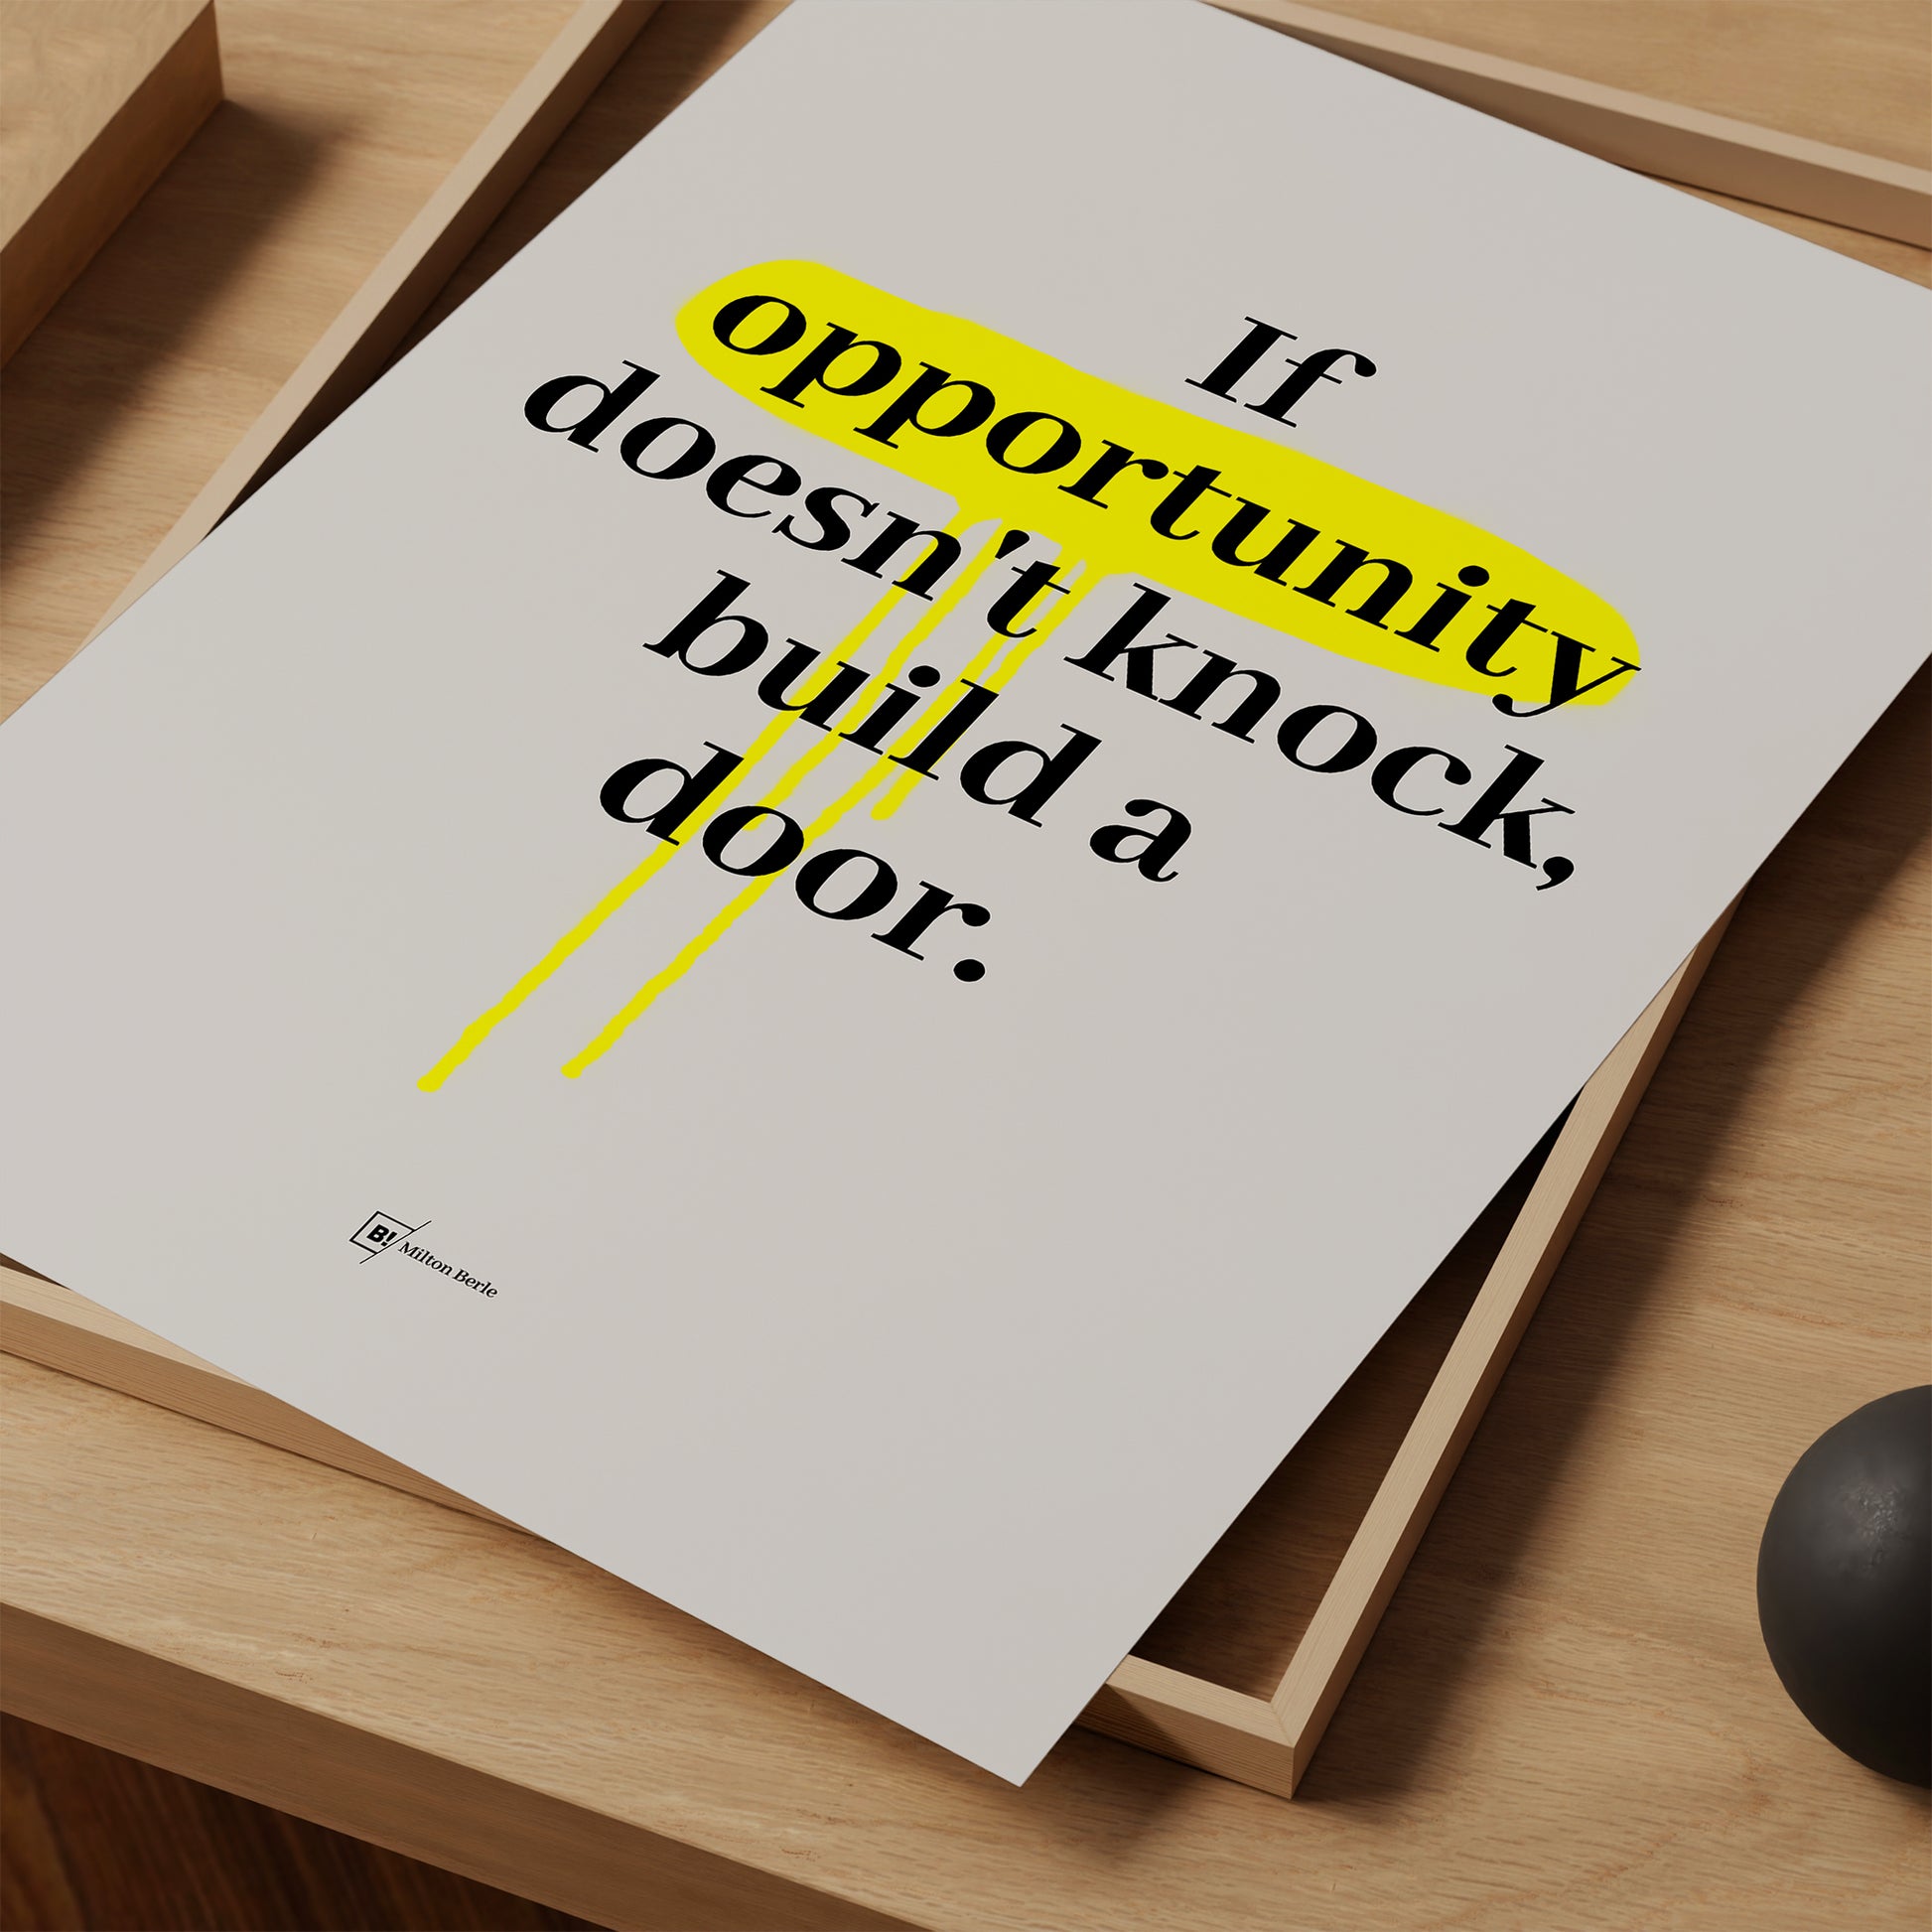 Be inspired by Milton Berle's famous "If opportunity doesn't knock, build a door" quote art print. This artwork was printed using giclée on archival acid-free paper and is presented as a print close-up that captures its timeless beauty in every detail.